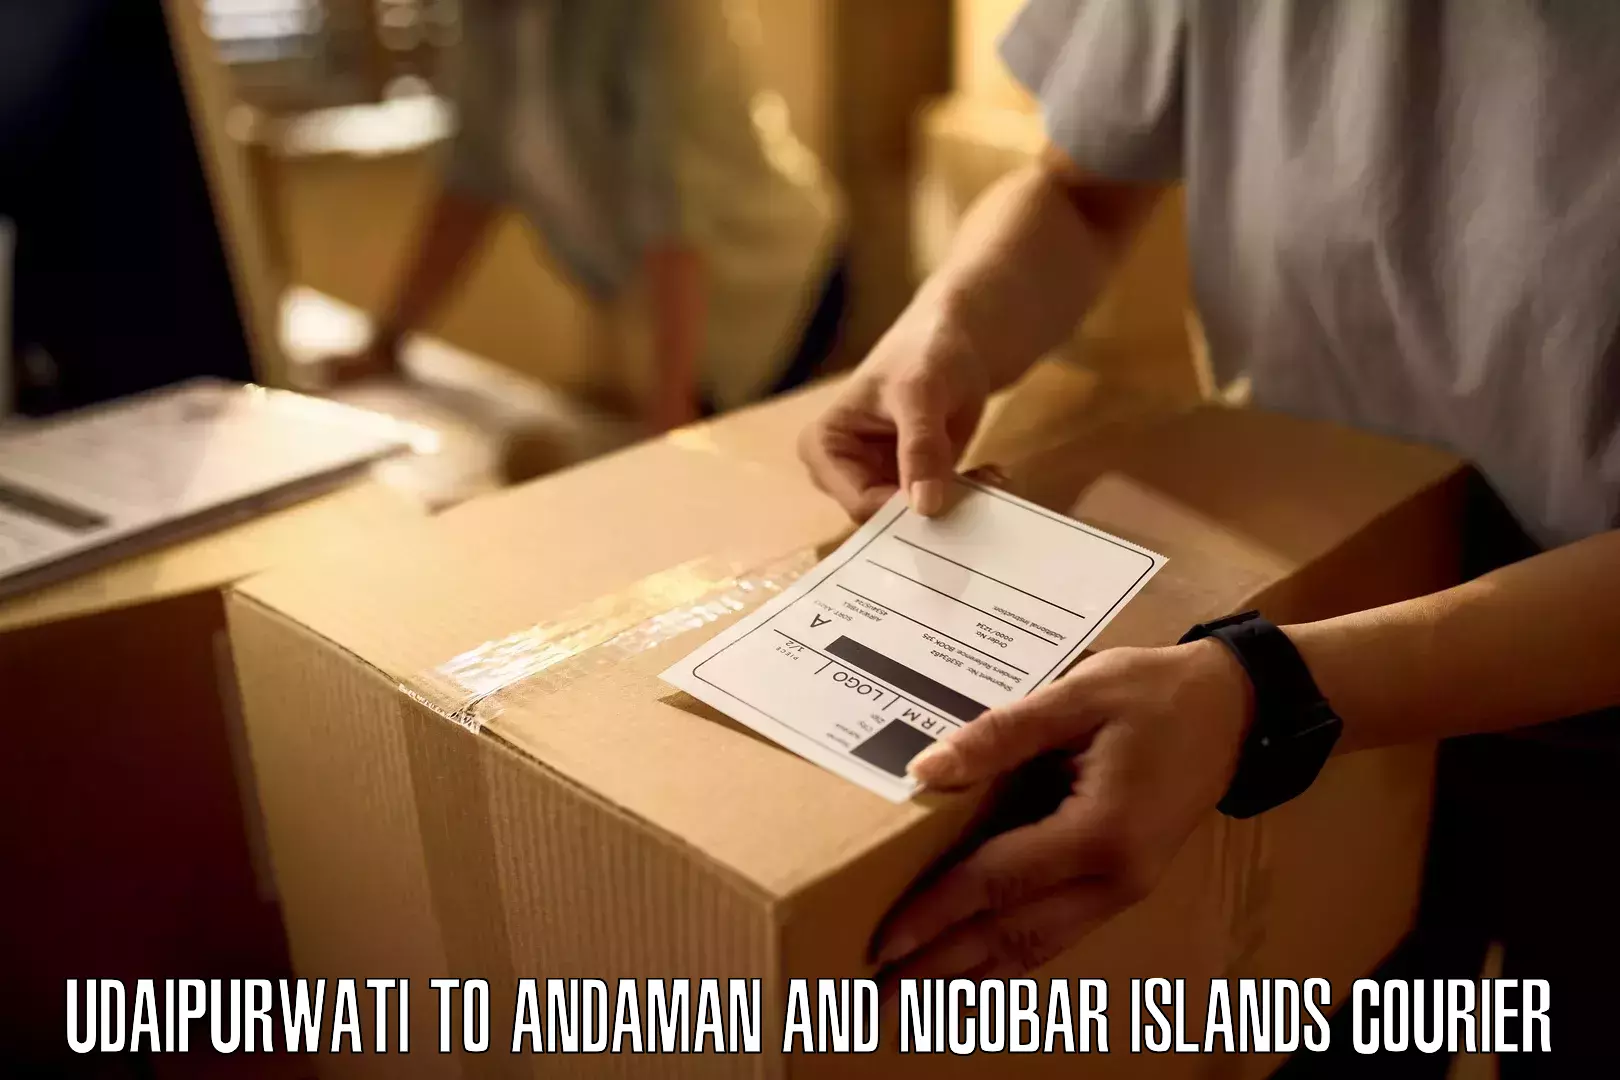 Subscription-based courier Udaipurwati to North And Middle Andaman